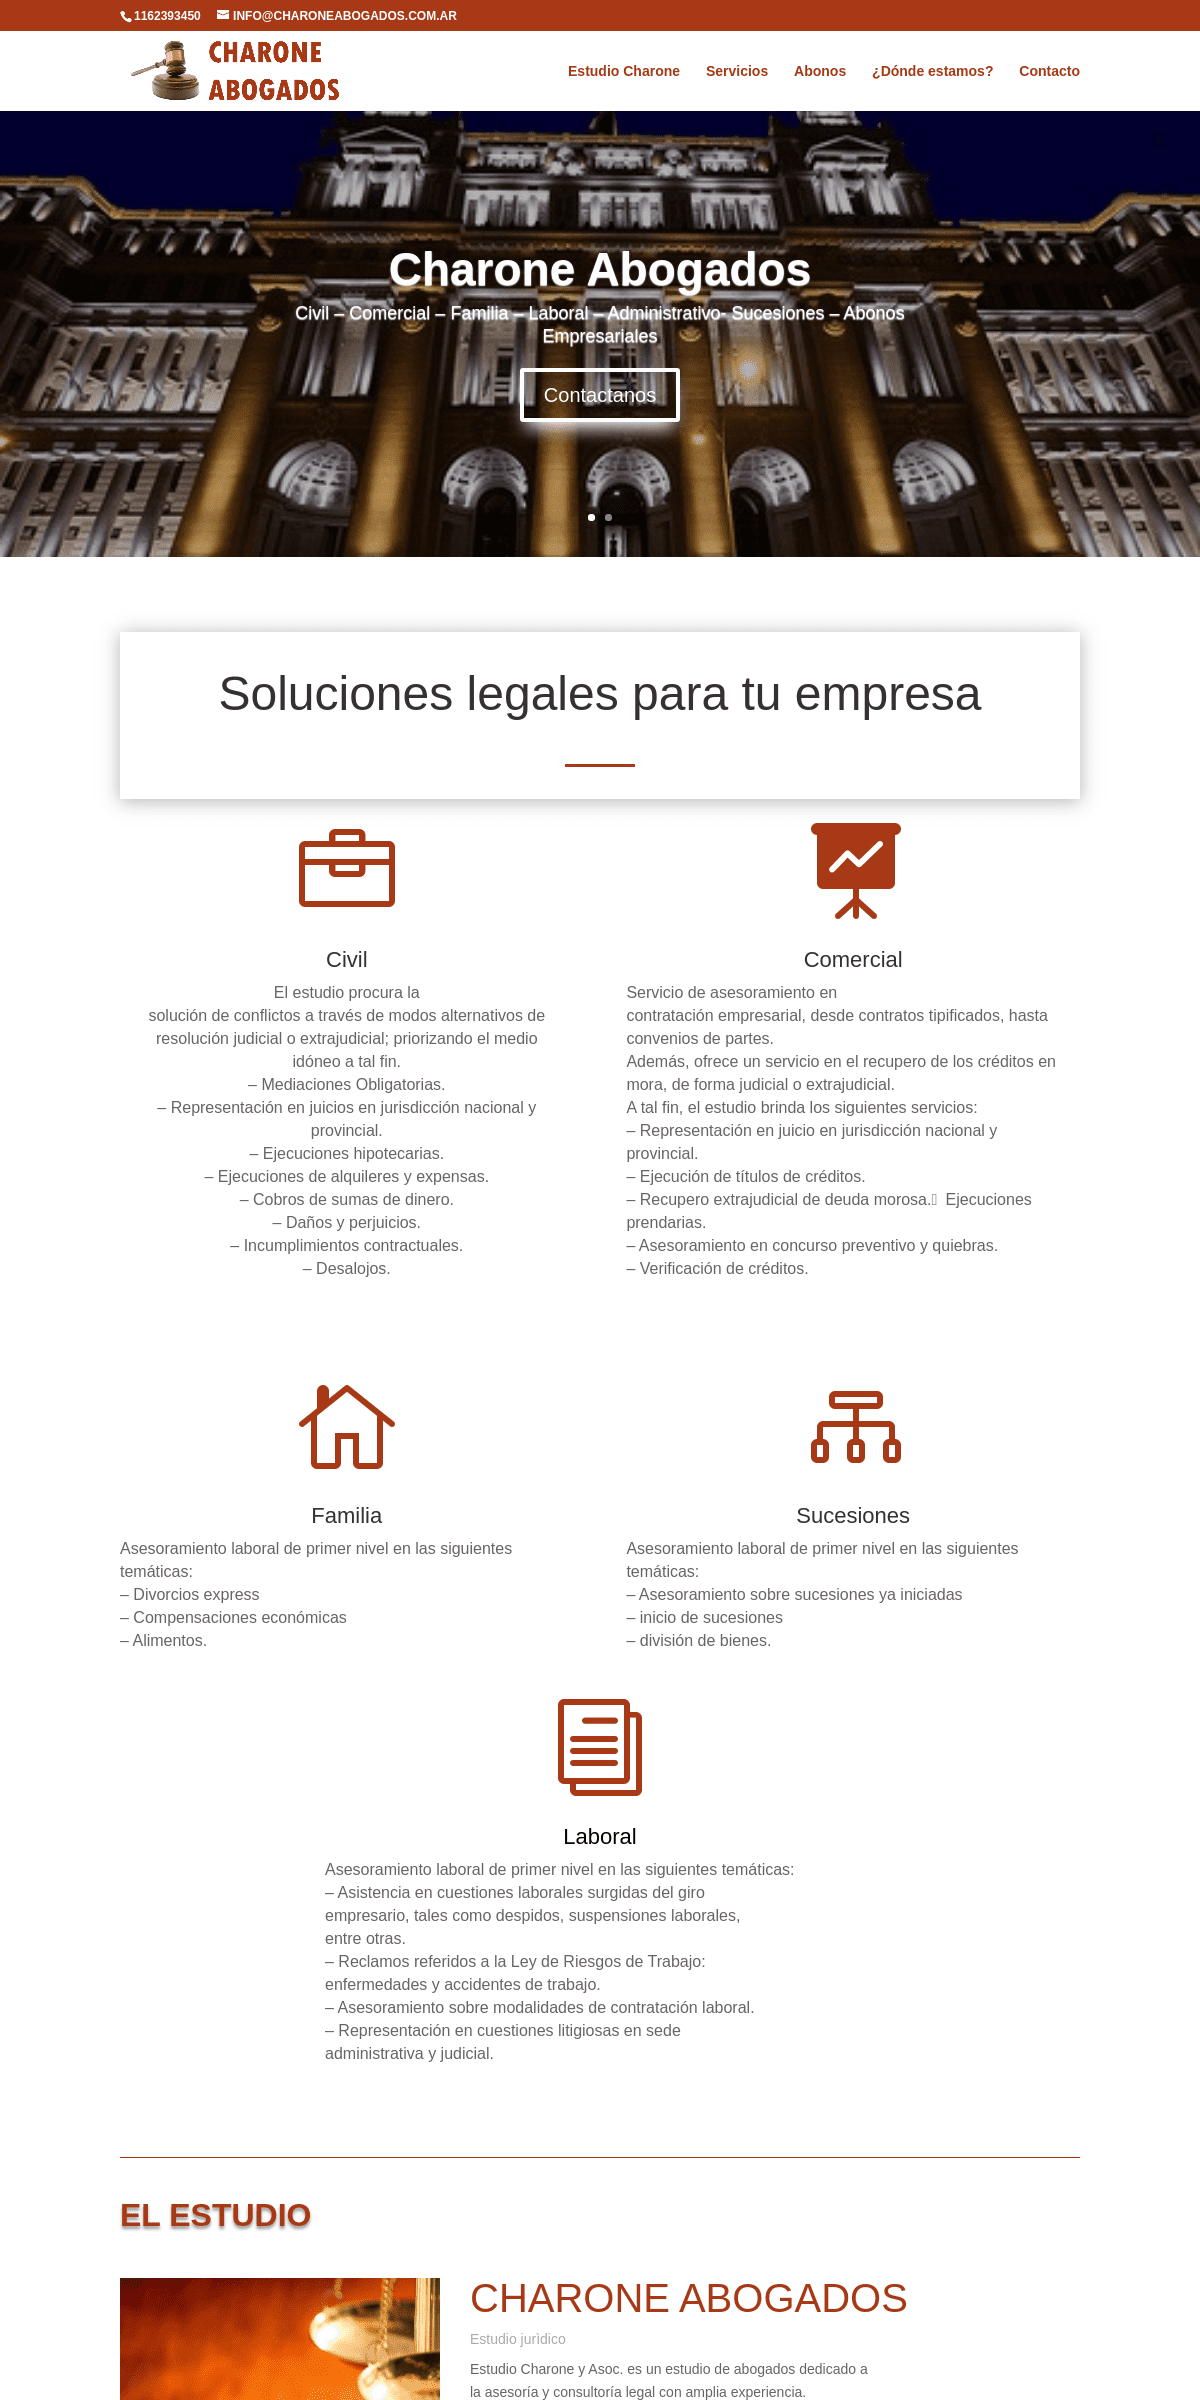 A complete backup of charoneabogados.com.ar